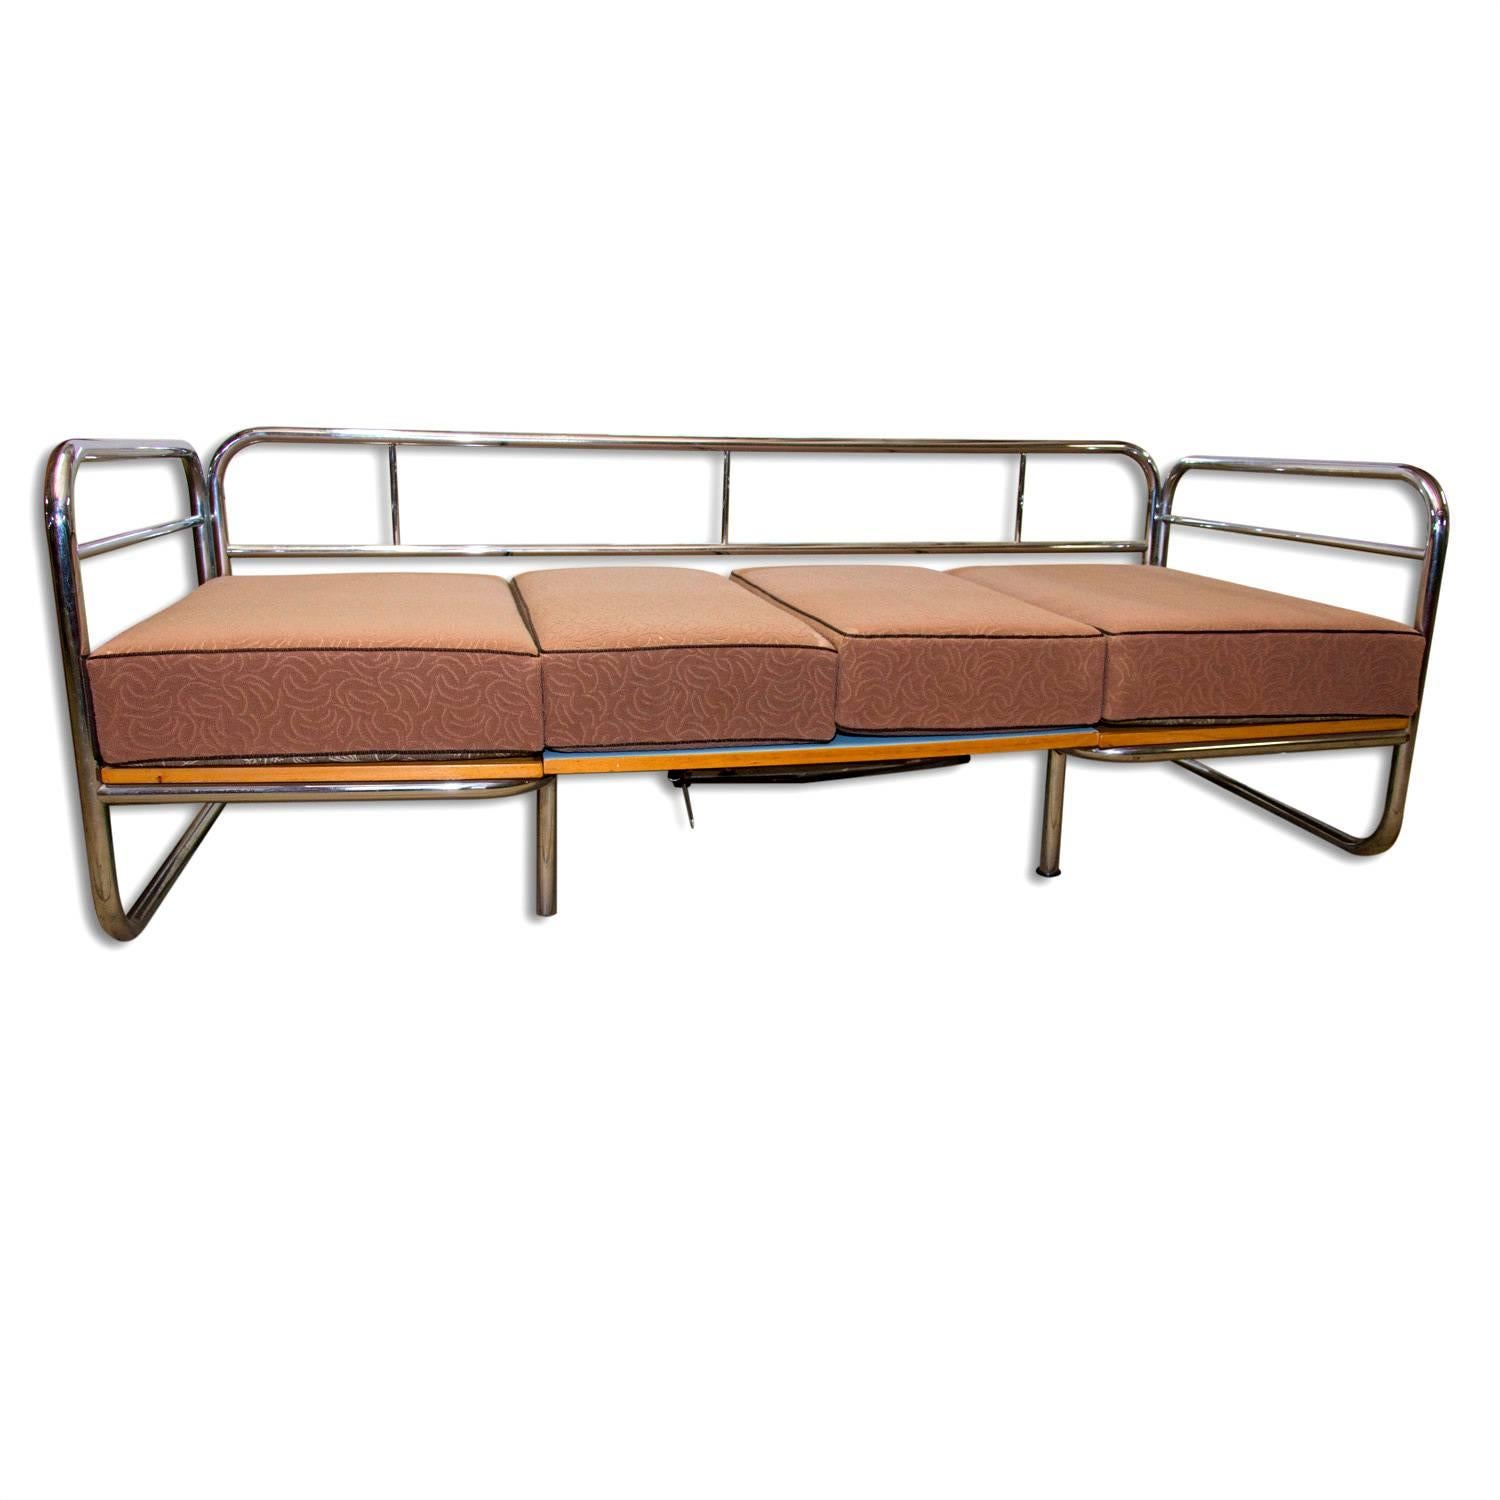 Exceptional Functionalist Multipurpose Seating Set-Sofa Bed, 1950s In Excellent Condition In Prague 8, CZ